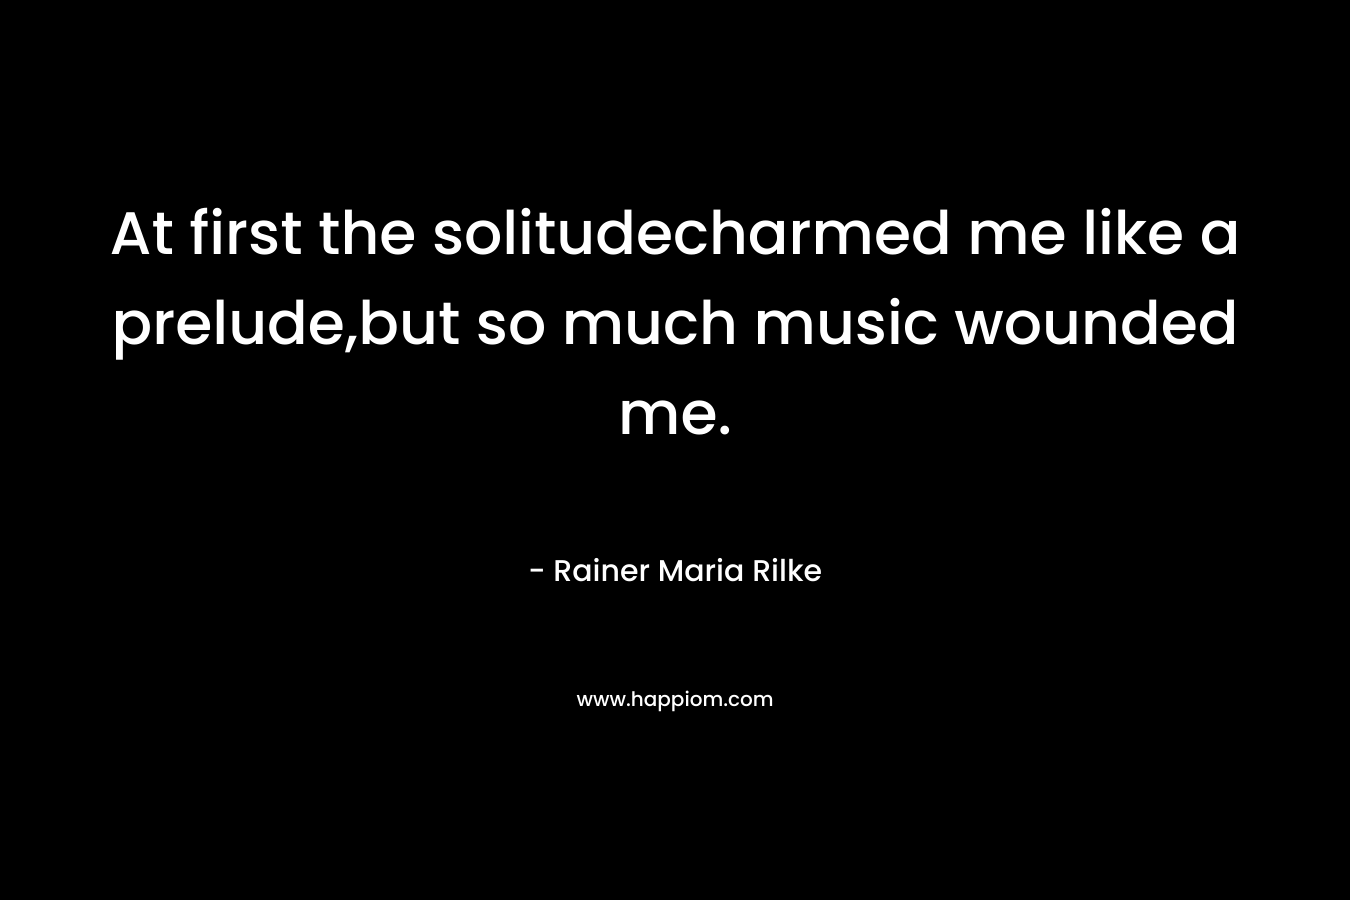 At first the solitudecharmed me like a prelude,but so much music wounded me. – Rainer Maria Rilke